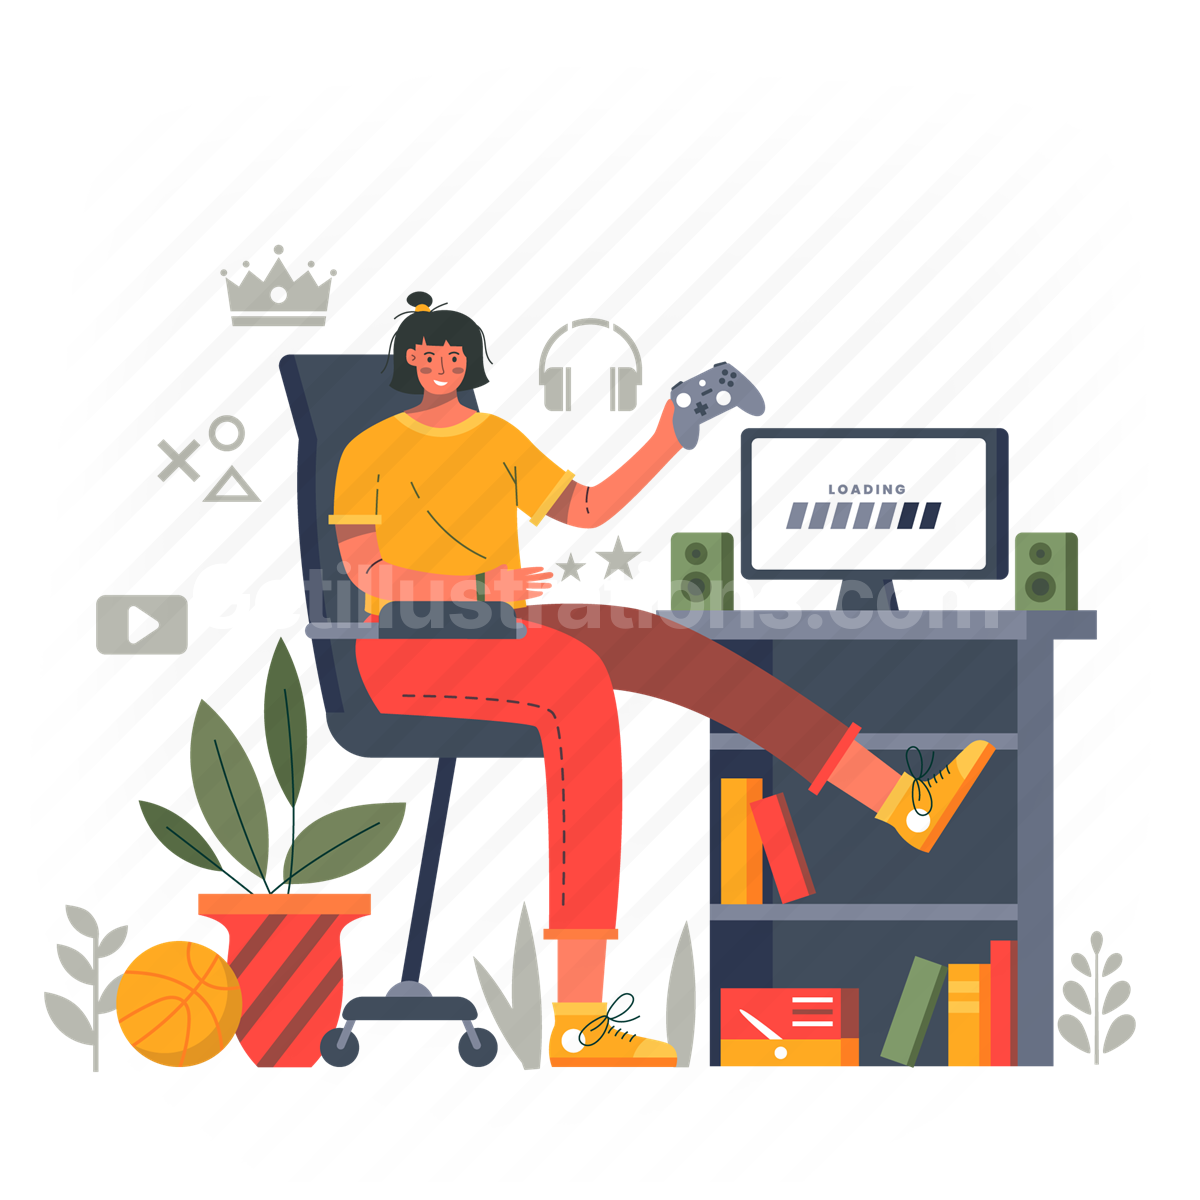 video game, computer, gaming, controller, furniture, headphone, woman, people, monitor